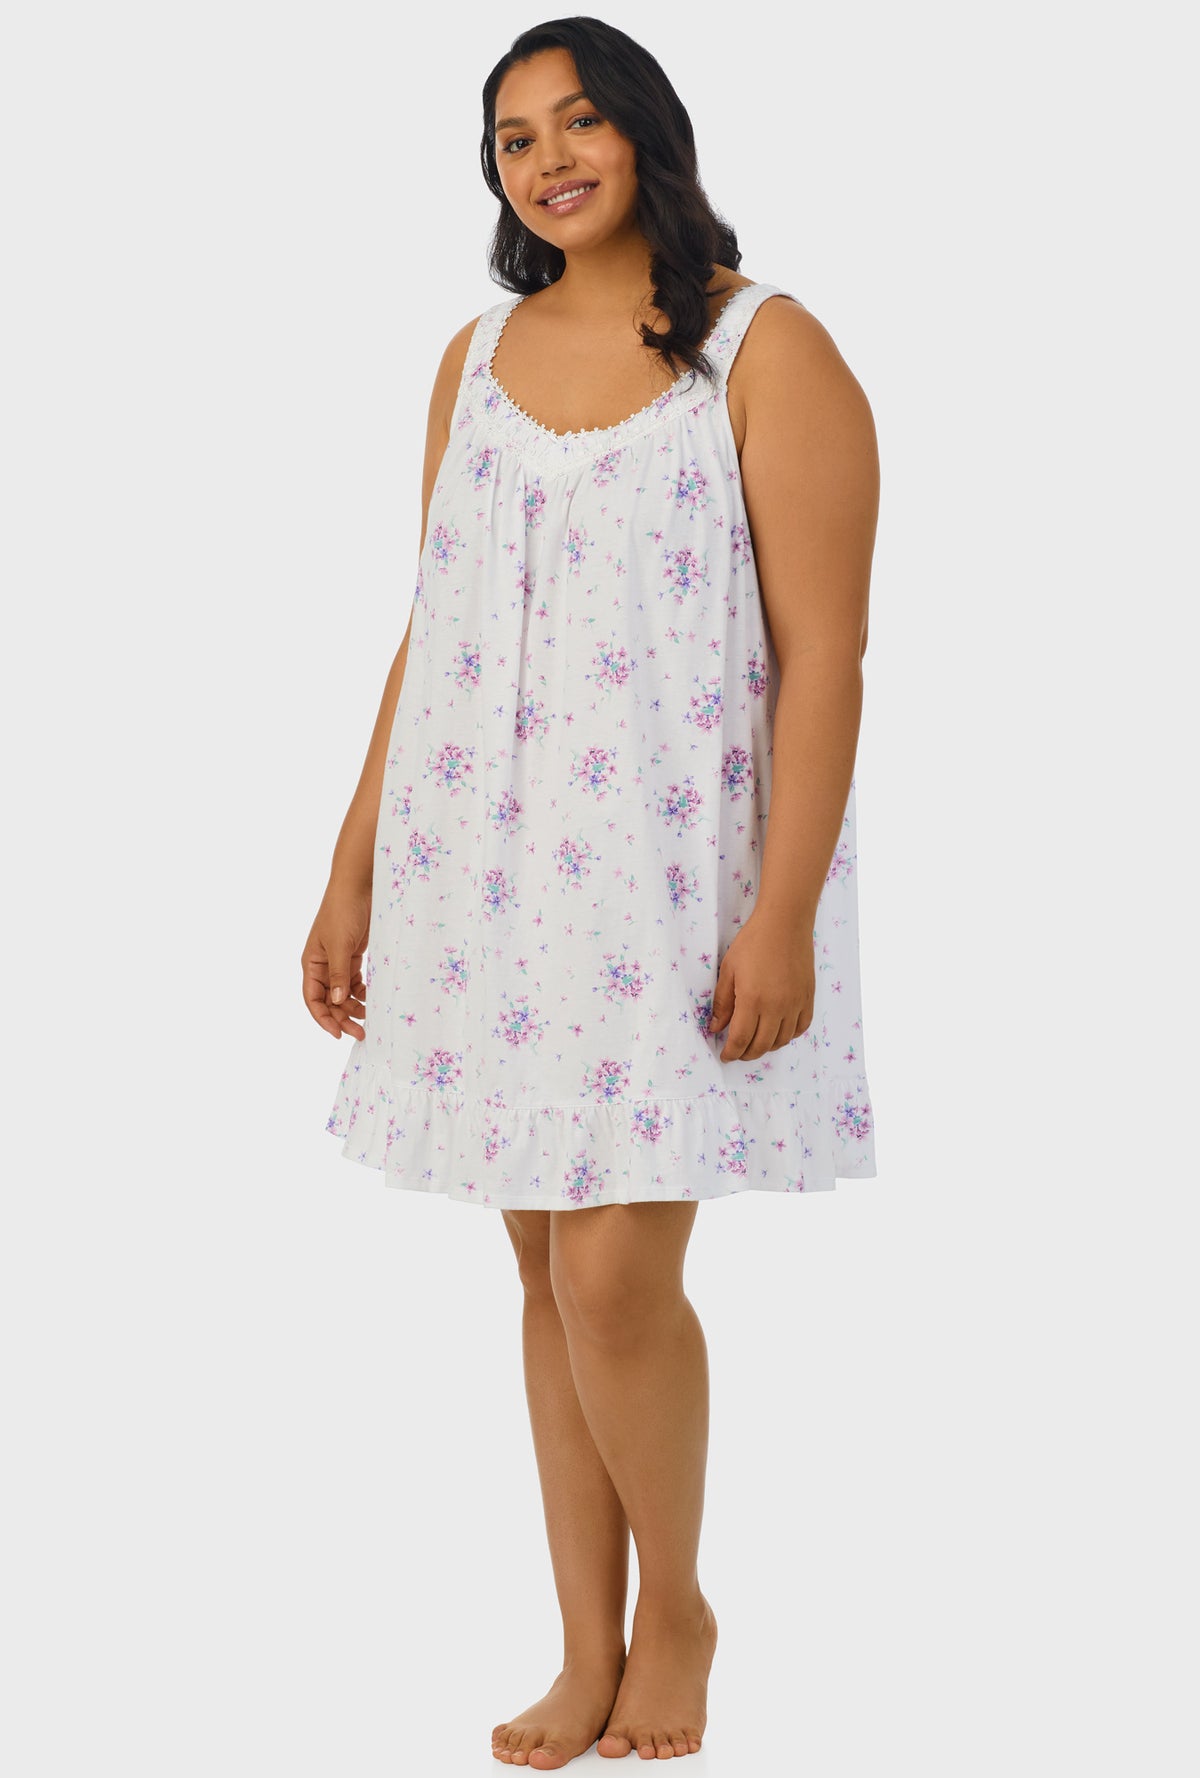 A lady wearing purple sleeveless plus size chemise with mulberry purple floral bouquet print.